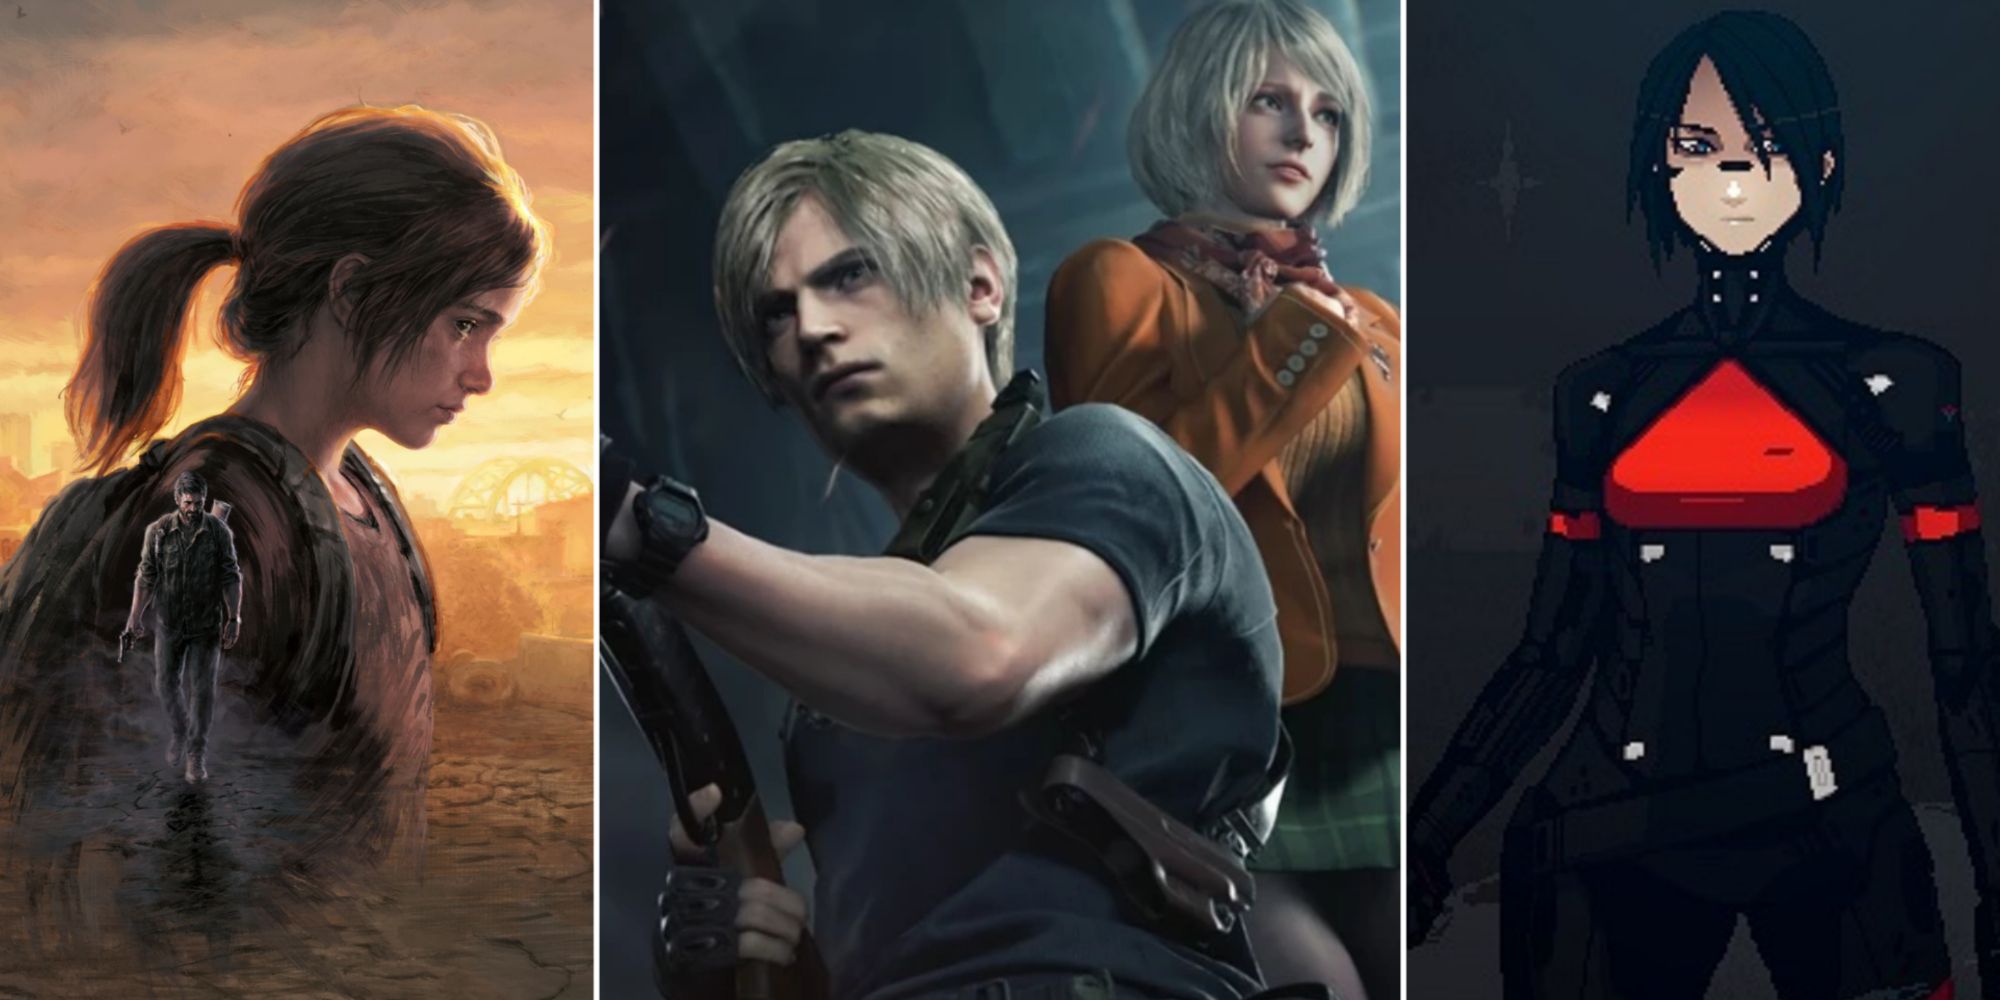 Resident Evil 4 Games Like Collage - Last of Us on left, RE4 in center, Signalis on right